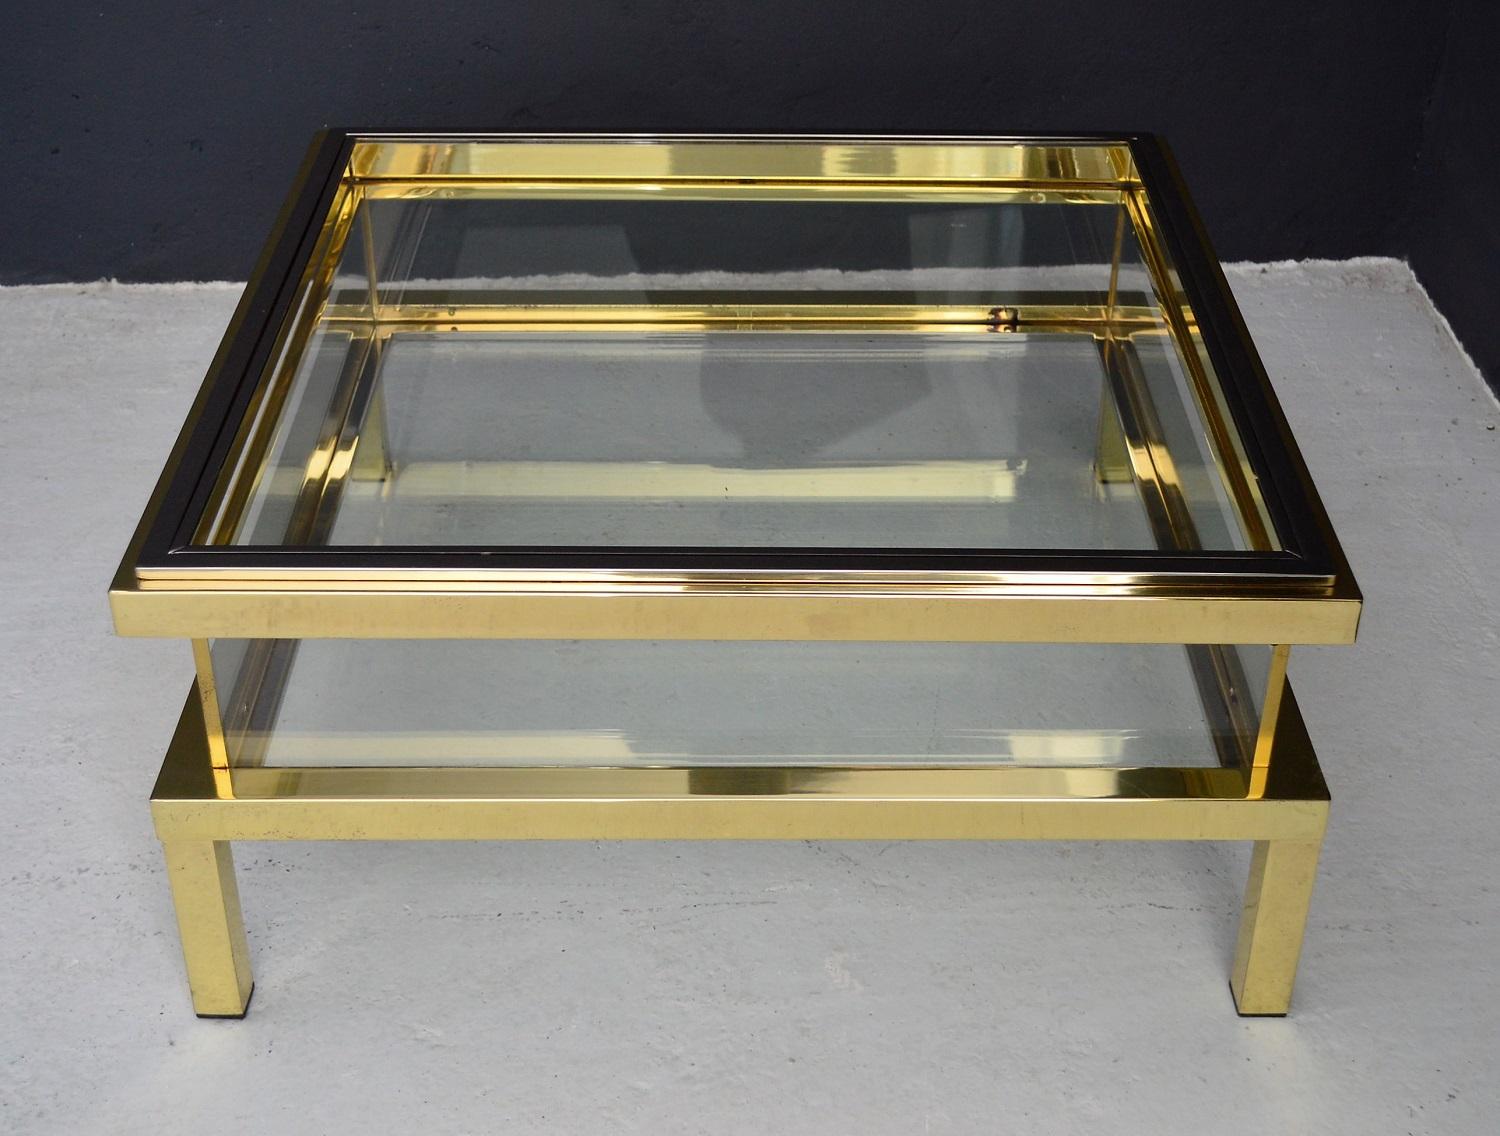 Hollywood Regency French Regency Brass Coffee Table with Slide-On Showcase by Maison Jansen, 1970s